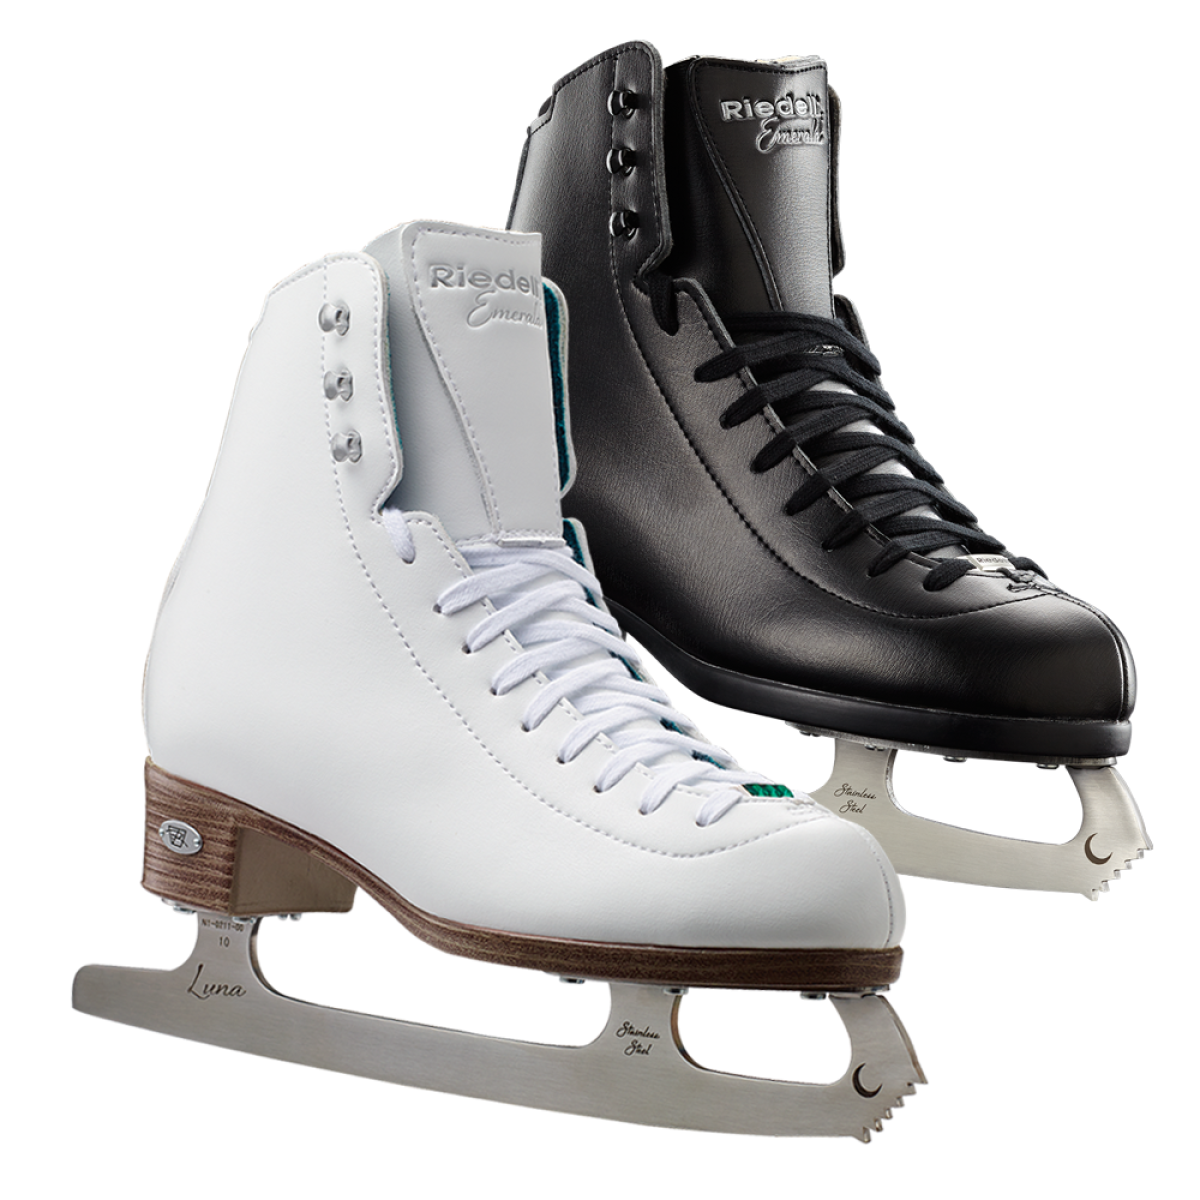 FIGURE SKATES LADIES 119 EMERALD RIEDELL - view 2